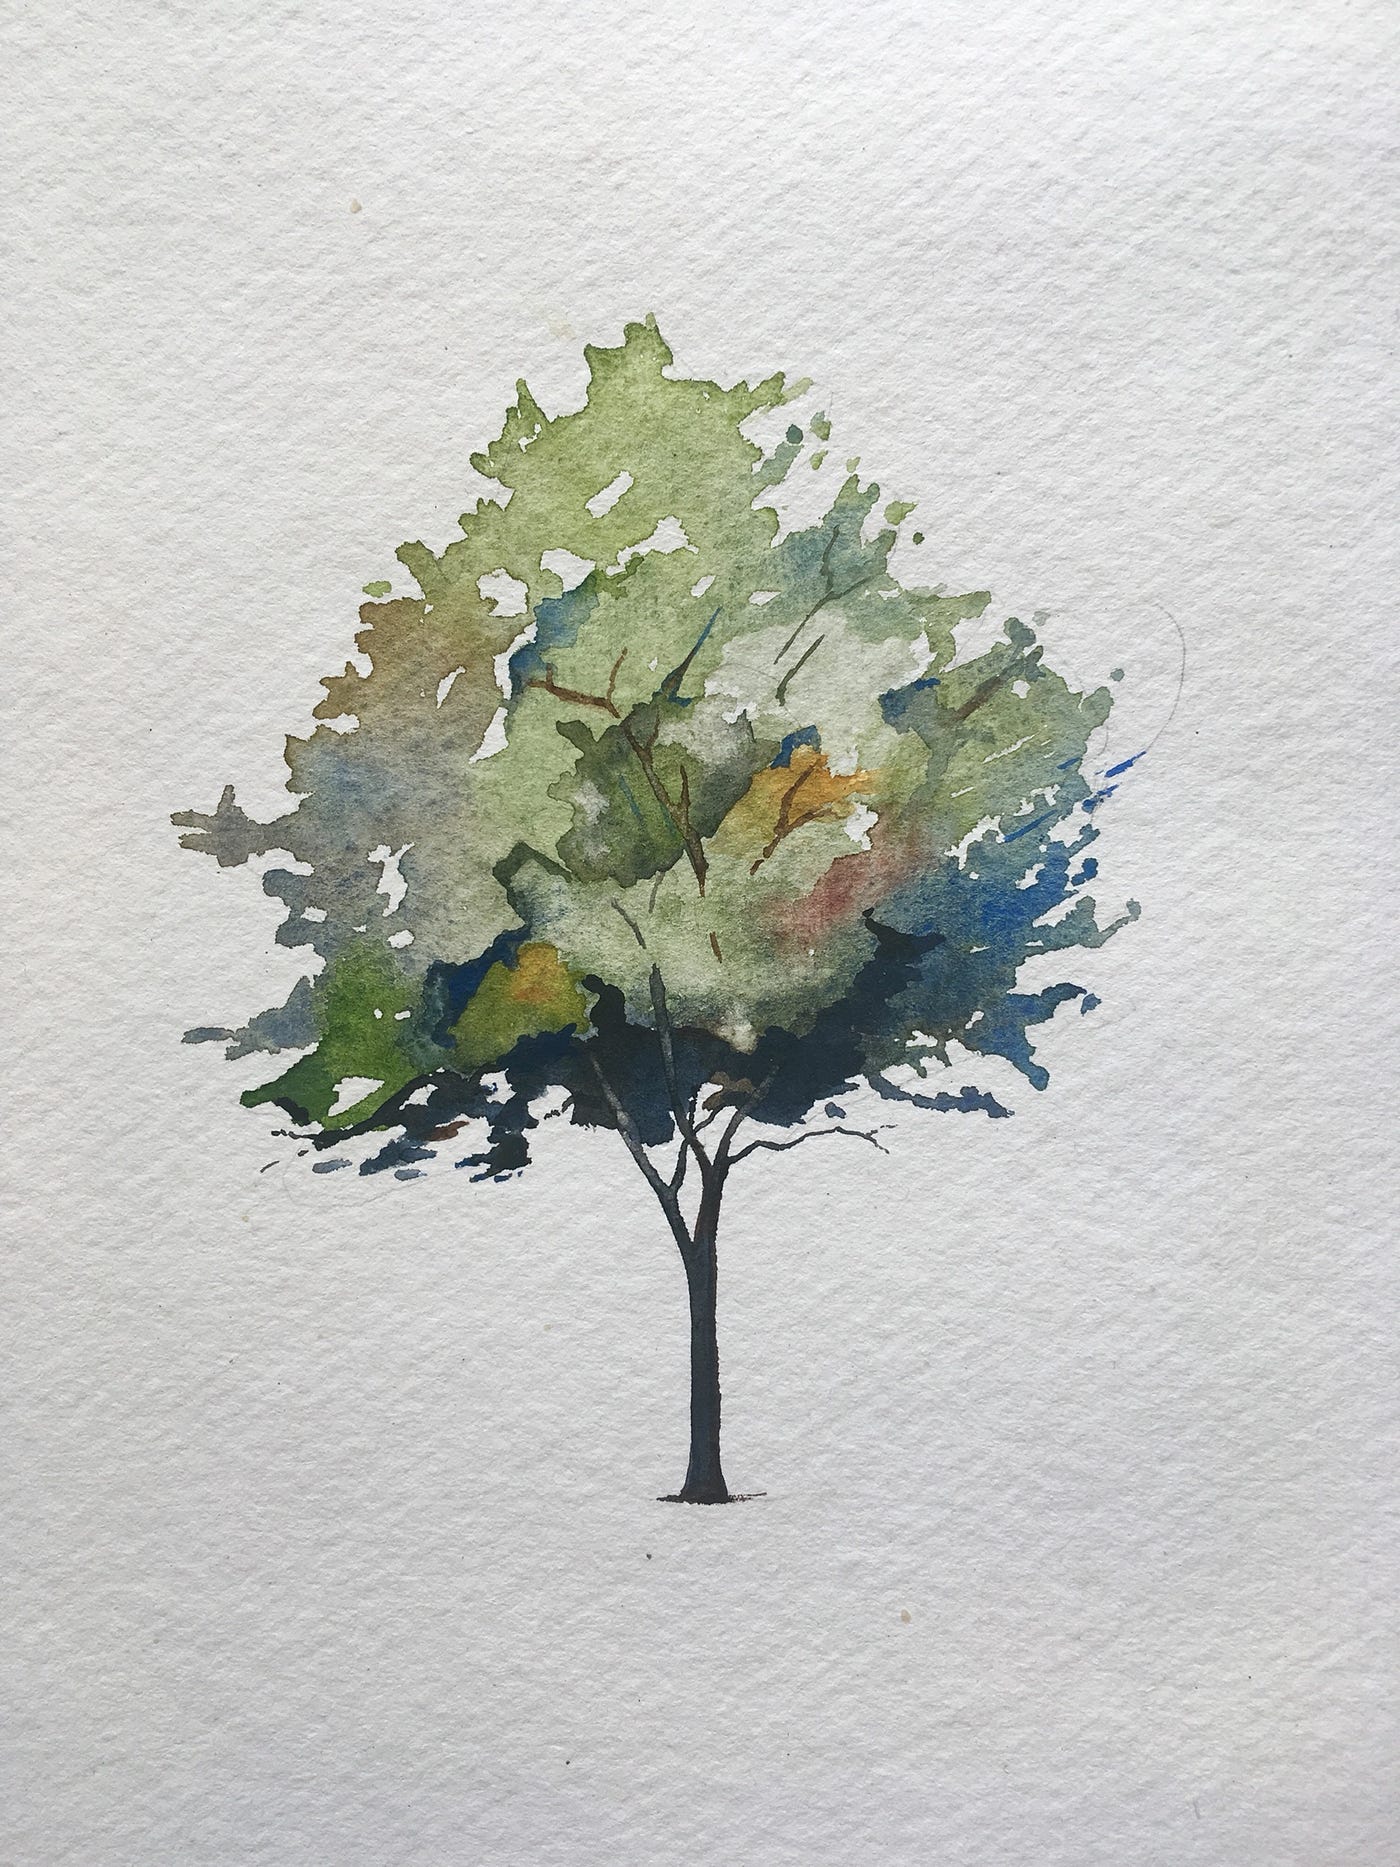 How To Paint A Tree In Watercolors, by Christopher P Jones